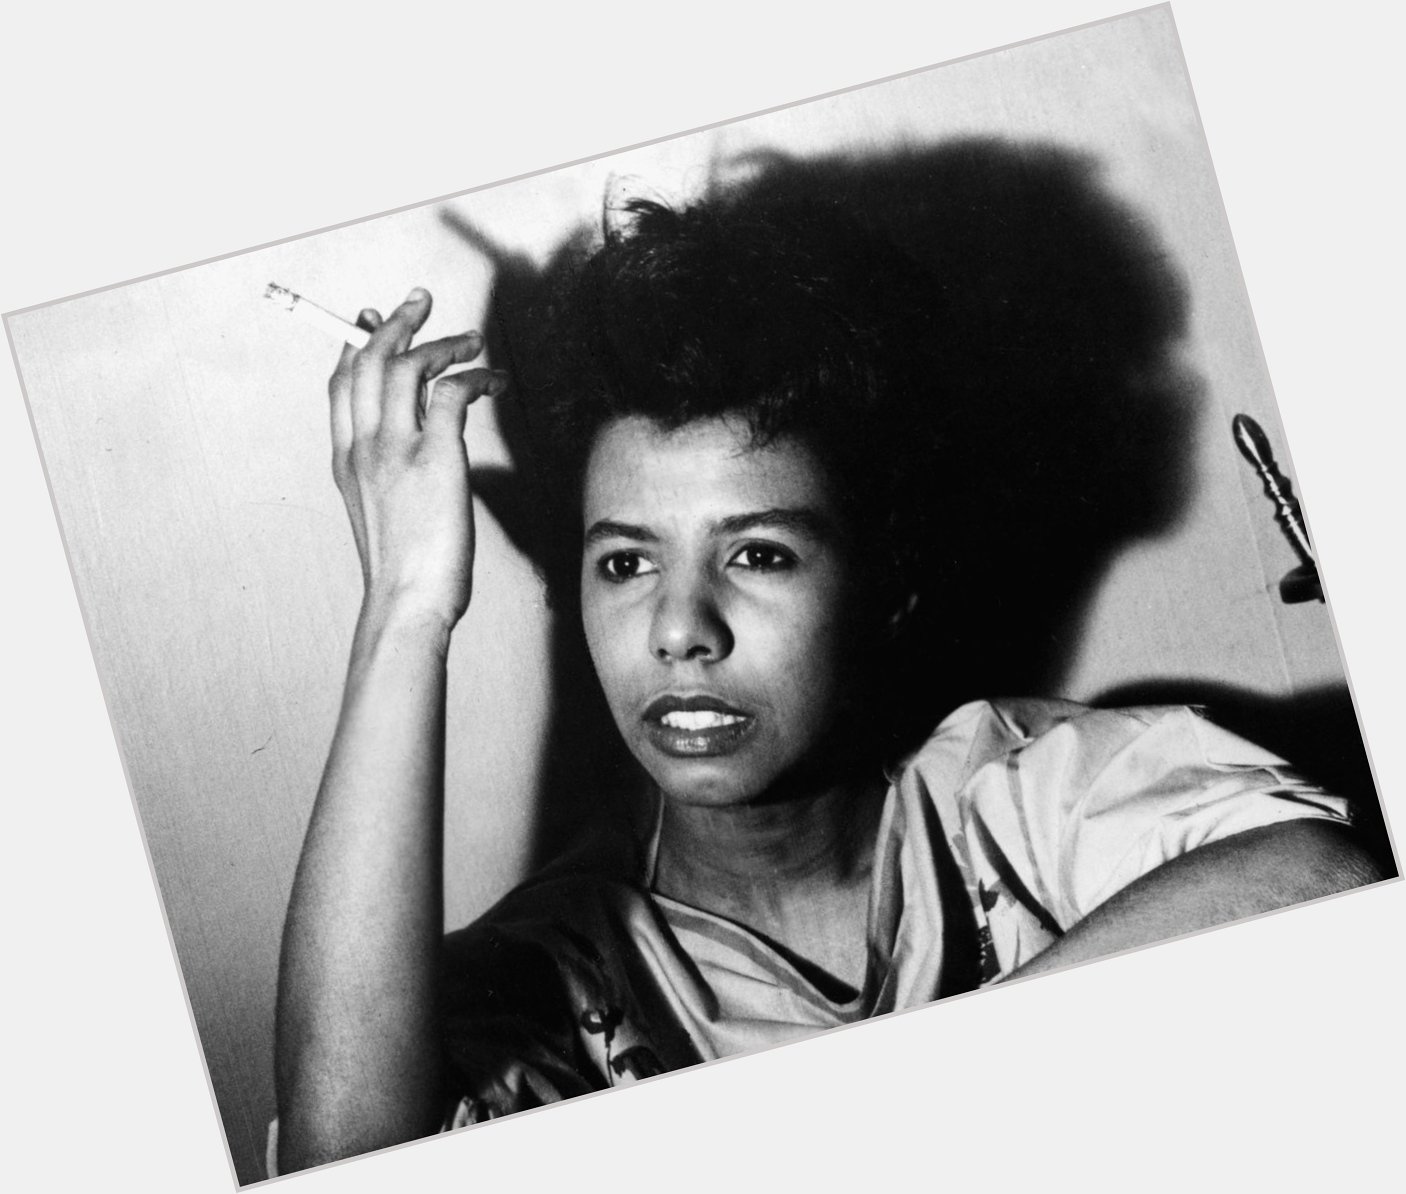   Happy Birthday to the one and only, the legend and icon, Lorraine Hansberry!!   